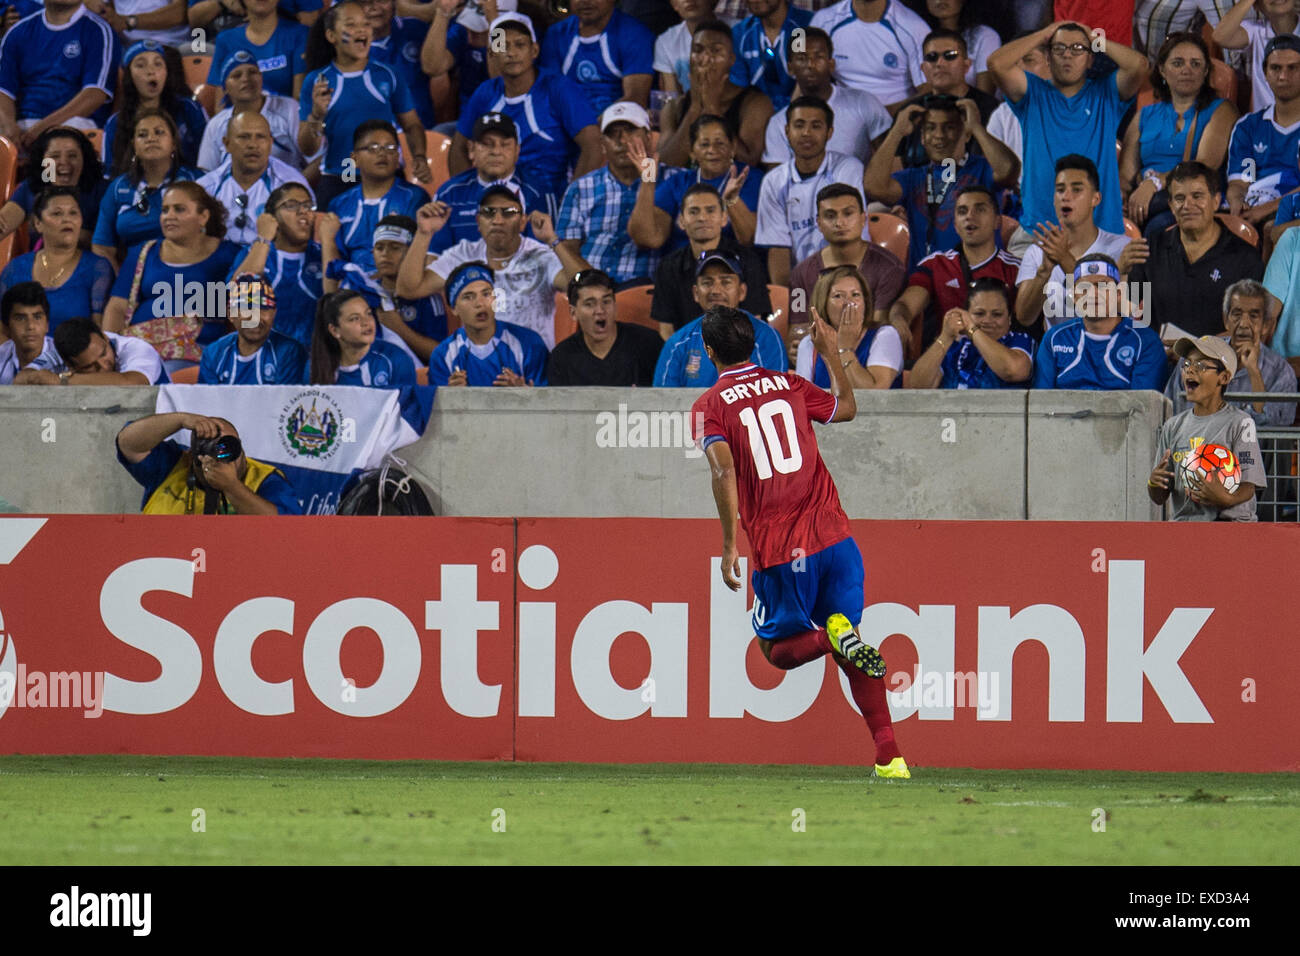 July 11, 2015: Costa Rica midfielder Bryan Ruiz (10) celebrates his goal during the 2nd half of an international CONCACAF Gold Cup soccer match between Costa Rica and El Salvador at BBVA Compass Stadium in Houston, TX. The game ended in a 1-1 draw. Credit:  Cal Sport Media/Alamy Live News Stock Photo